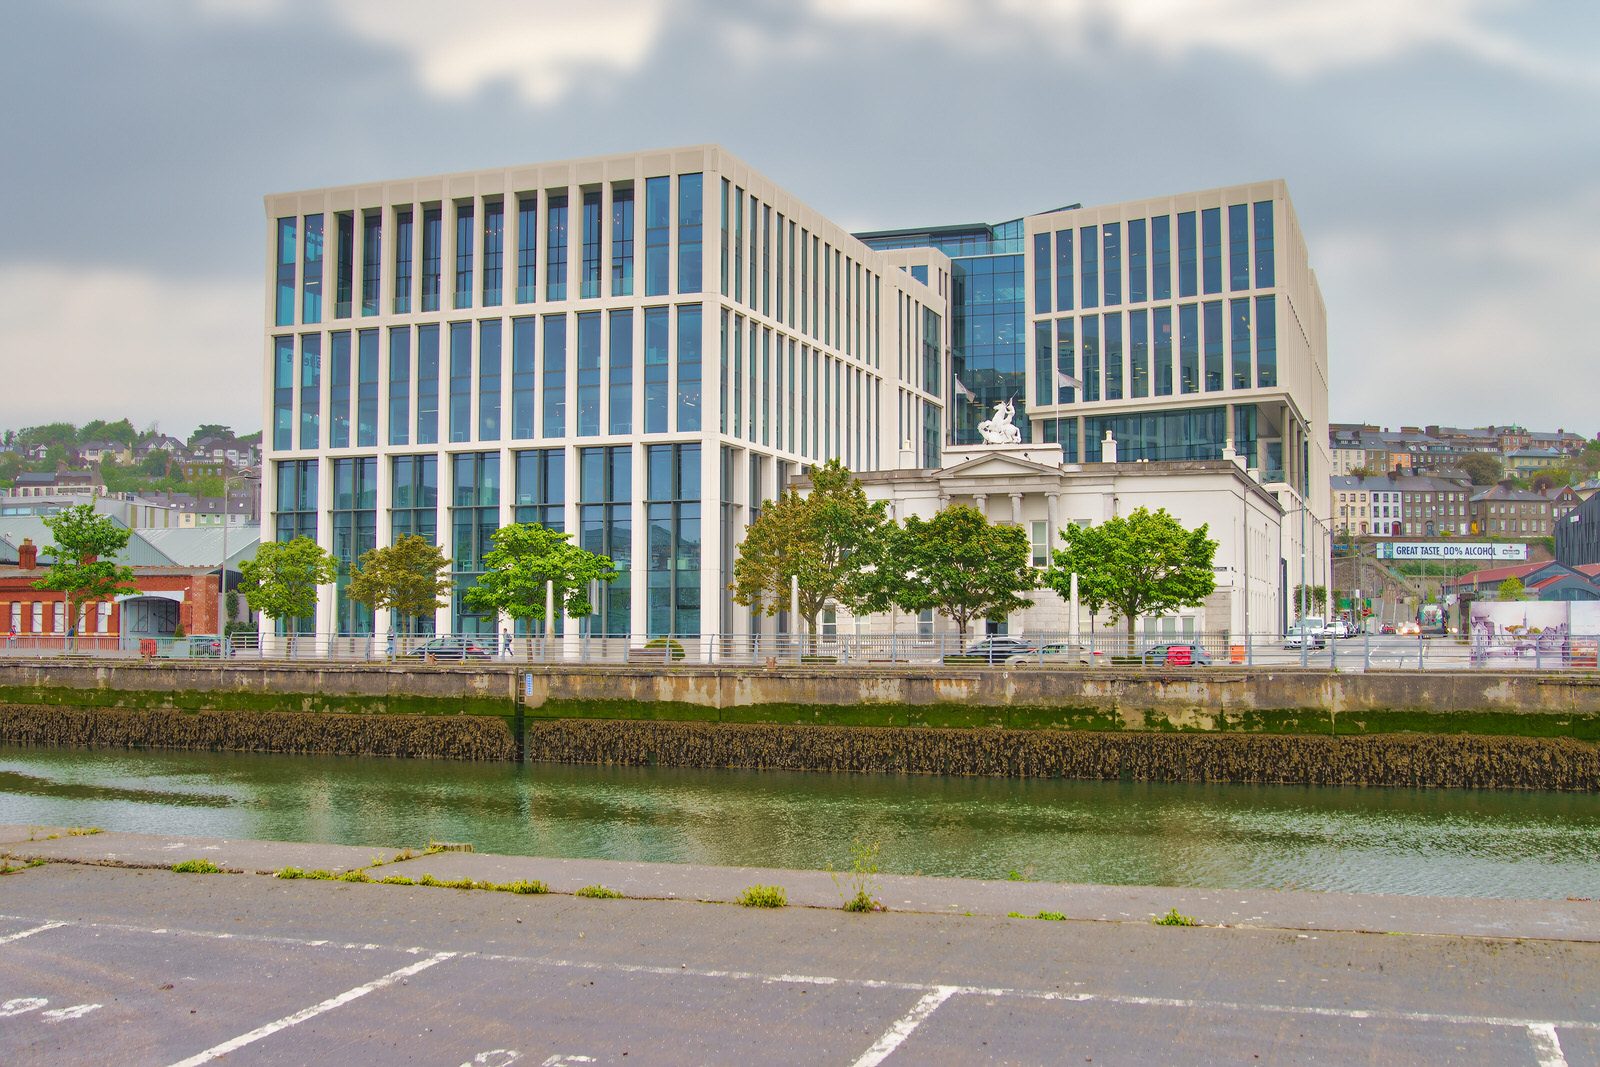 CUSTOM HOUSE HOUSE QUAY [I PHOTOGRAPHED THE AREA AND NEARBY IN JULY 2022] 016